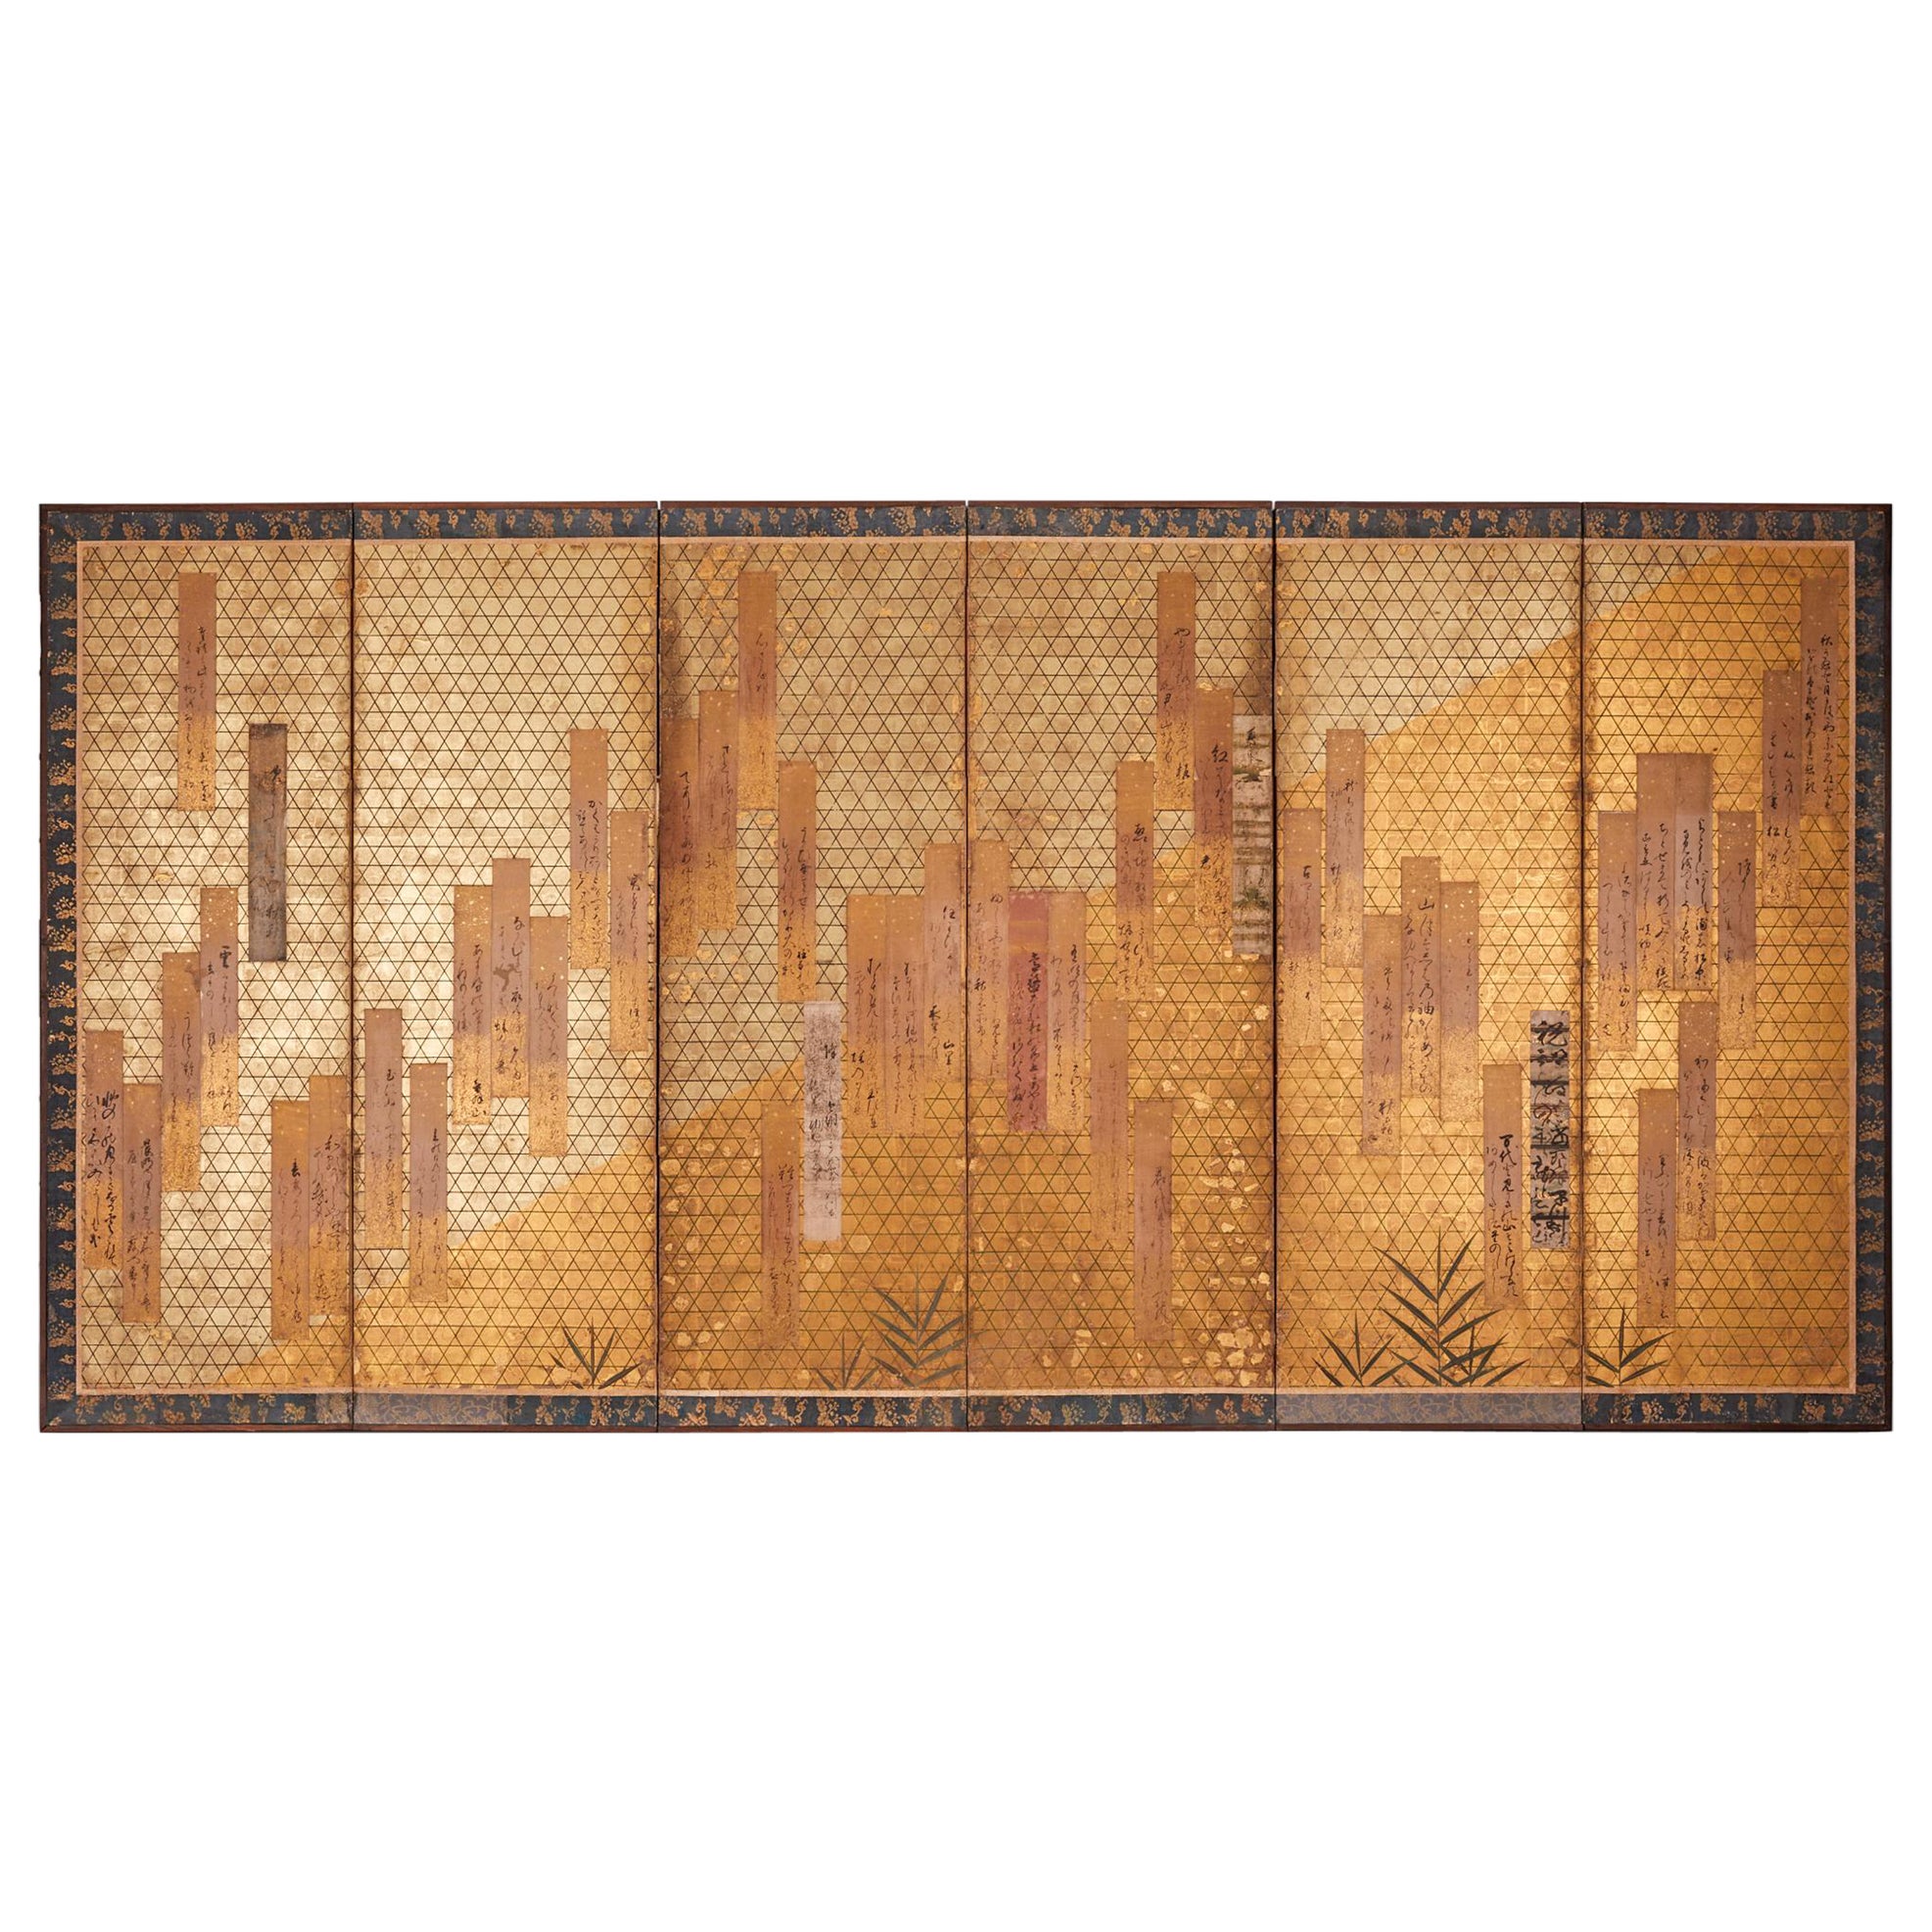 Japanese Six Panel Screen: Waka Poems on Basketry Design For Sale